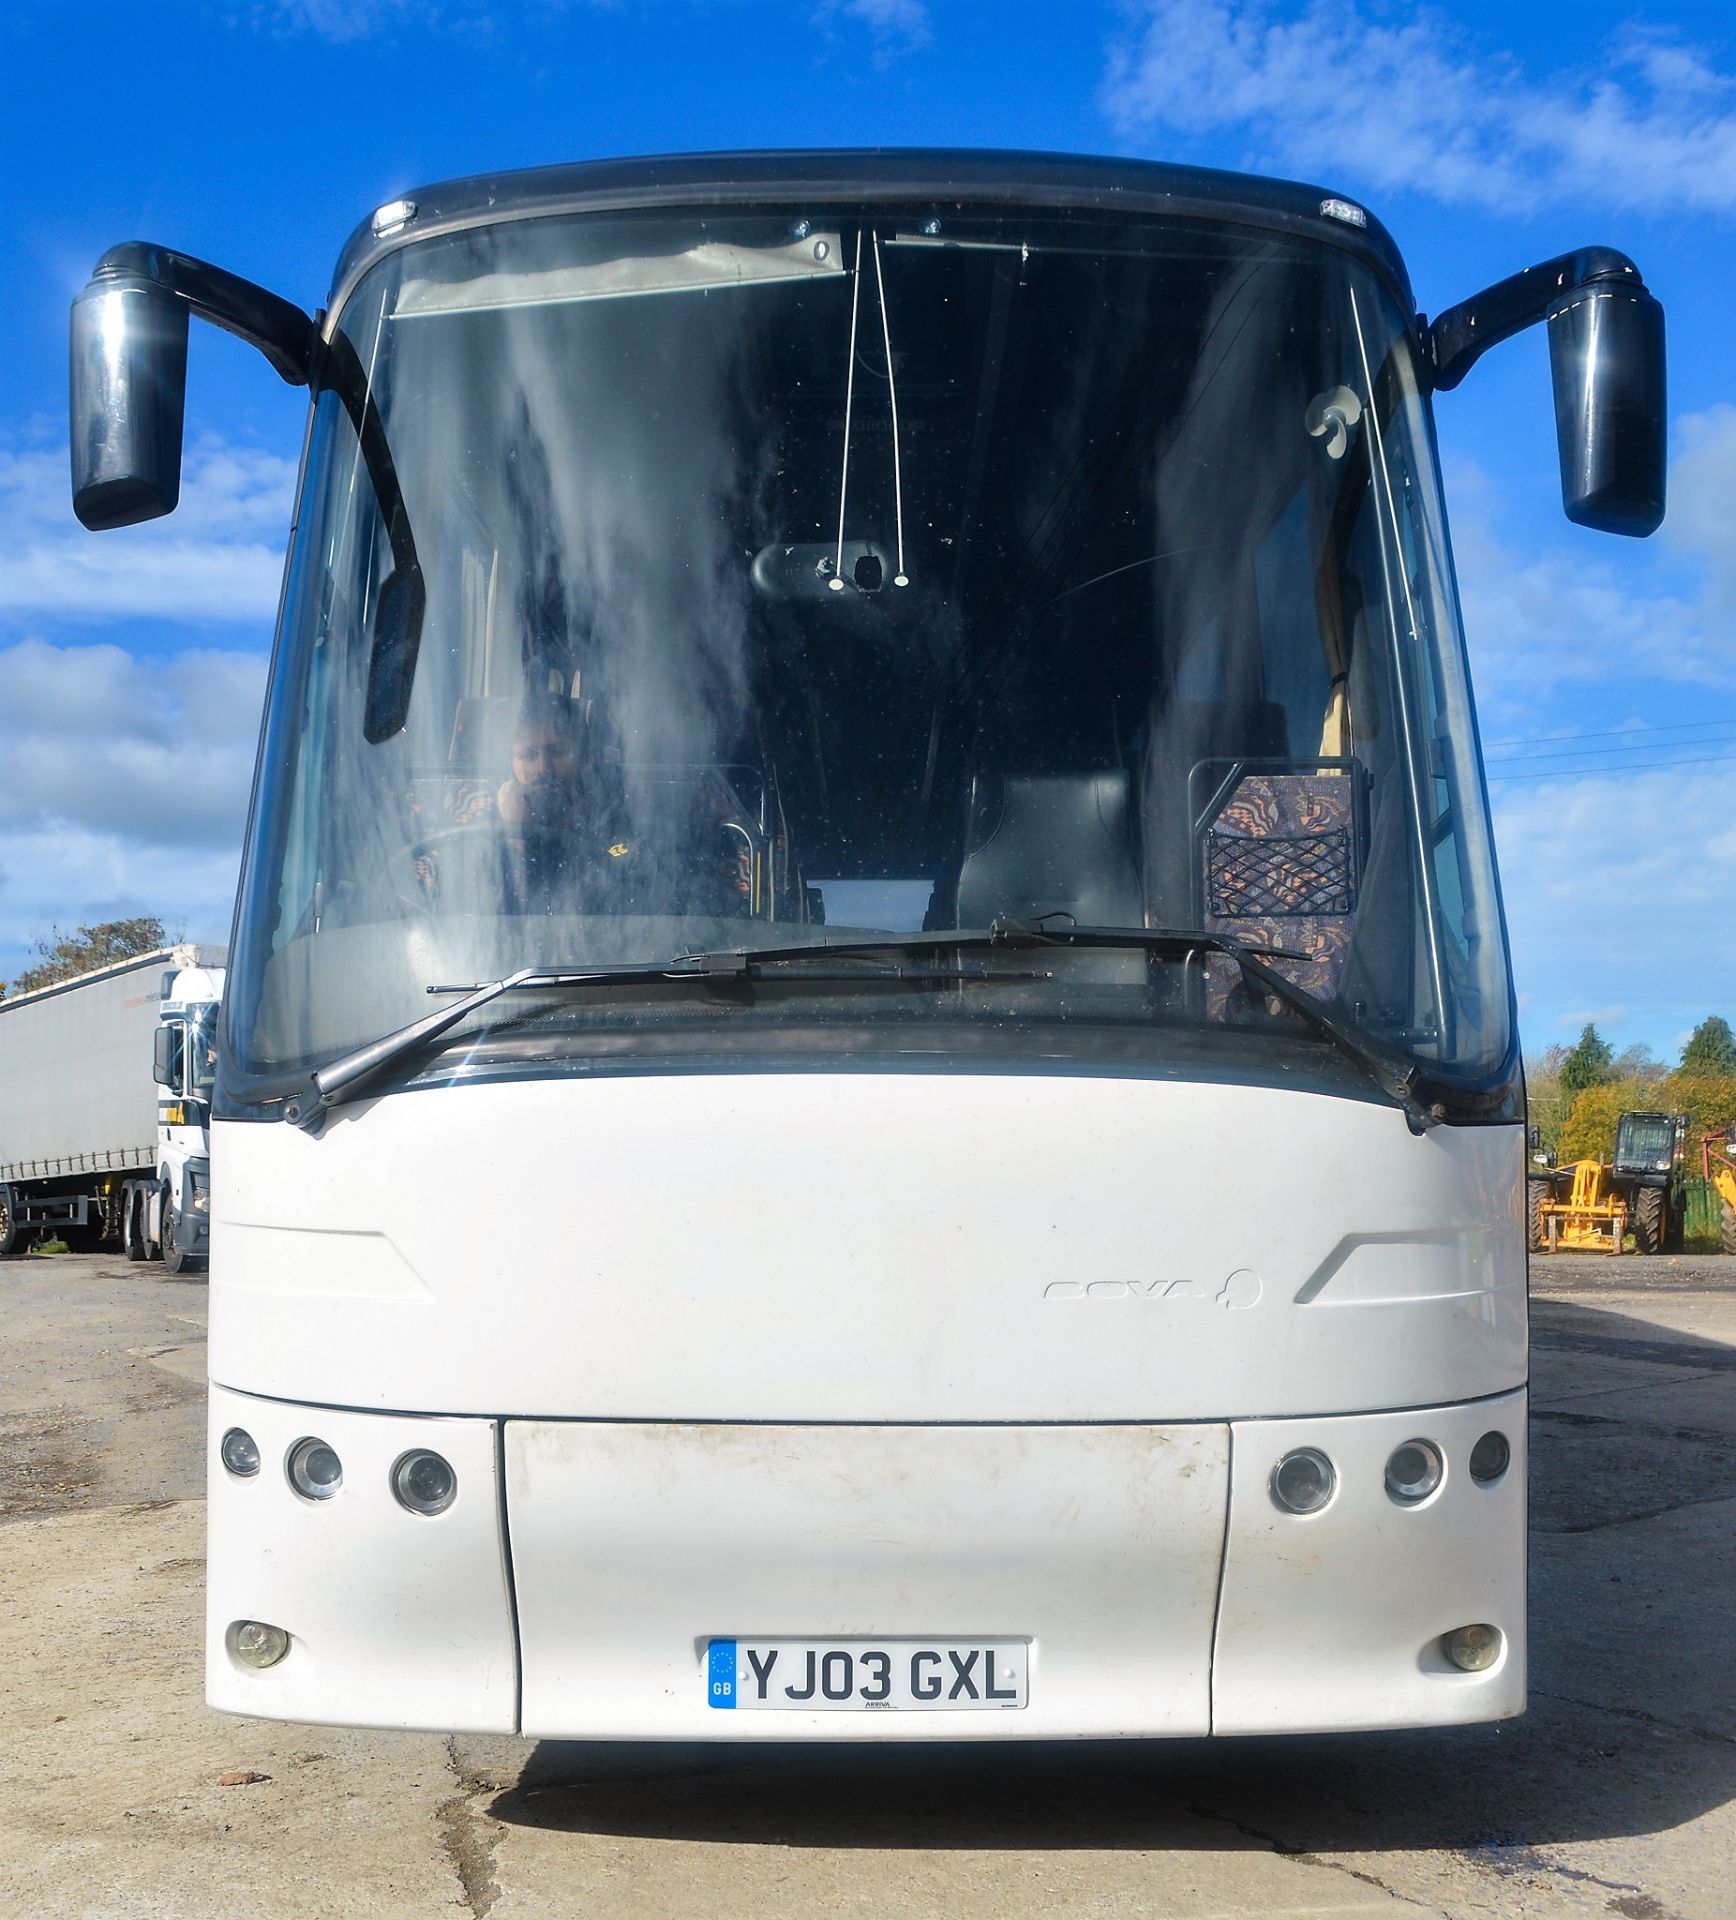 DAF Bova Futura 49 seat luxury coach Registration Number: YJ03 GXL Chassis Number: XL9AA18P230003675 - Image 5 of 10